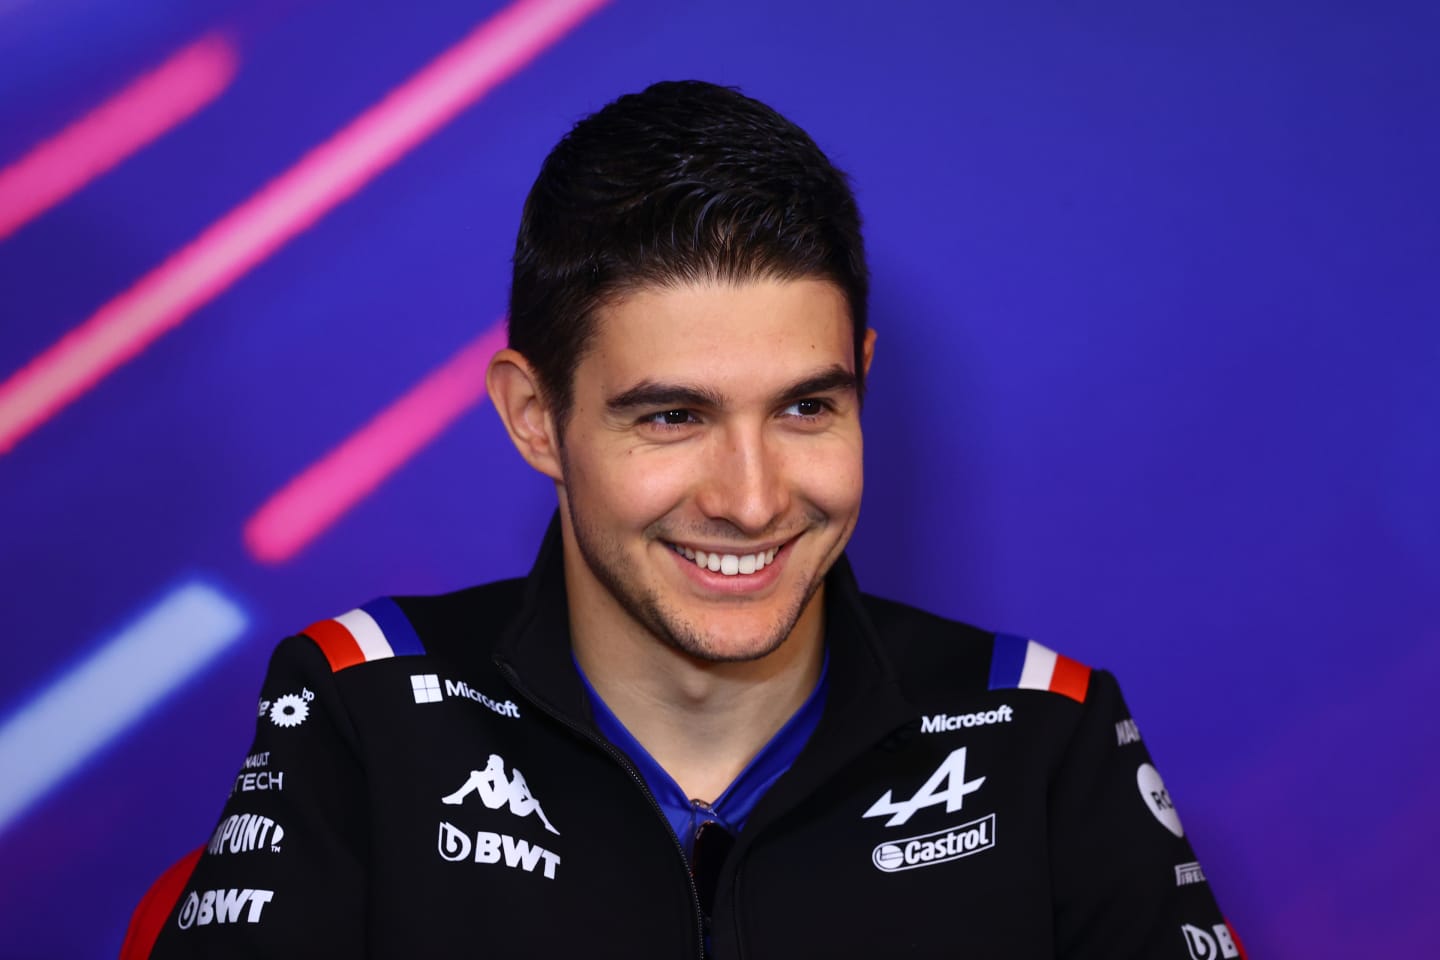 MONTREAL, QUEBEC - JUNE 17: Esteban Ocon of France and Alpine F1 looks on in the Drivers Press Conference prior to practice ahead of the F1 Grand Prix of Canada at Circuit Gilles Villeneuve on June 17, 2022 in Montreal, Quebec. (Photo by Dan Istitene/Getty Images)